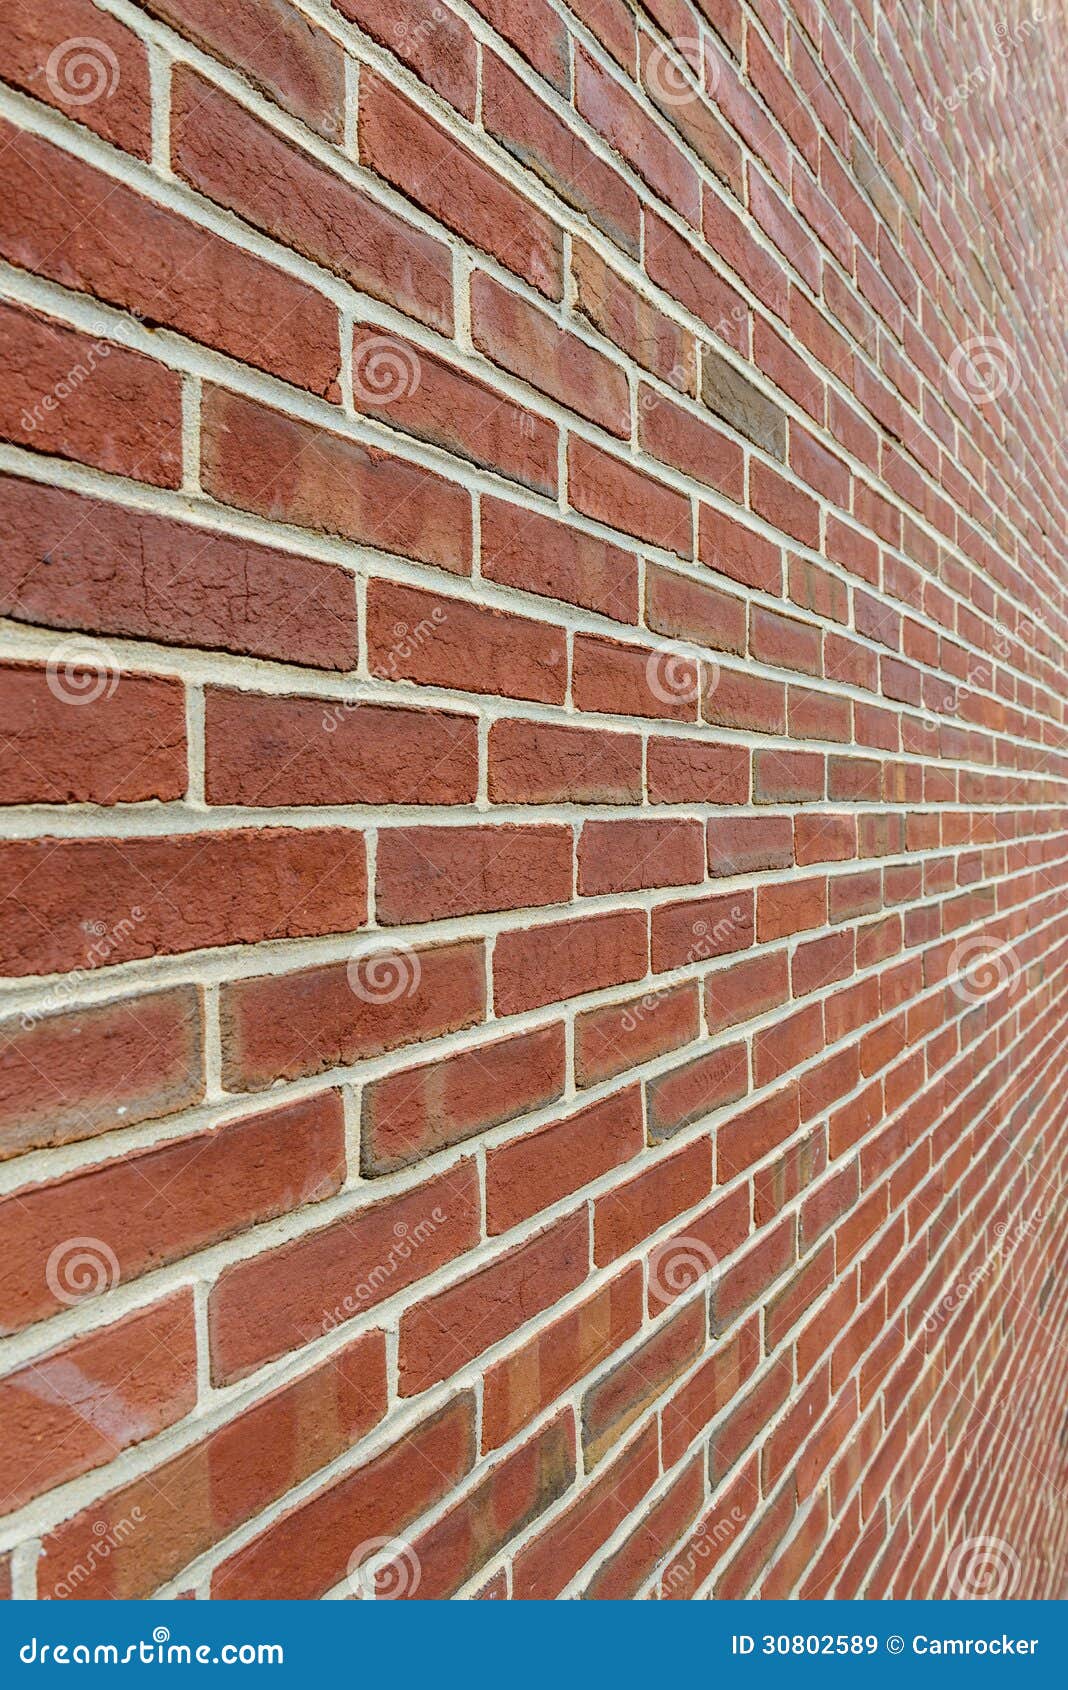 brick wall with diminishing perspective